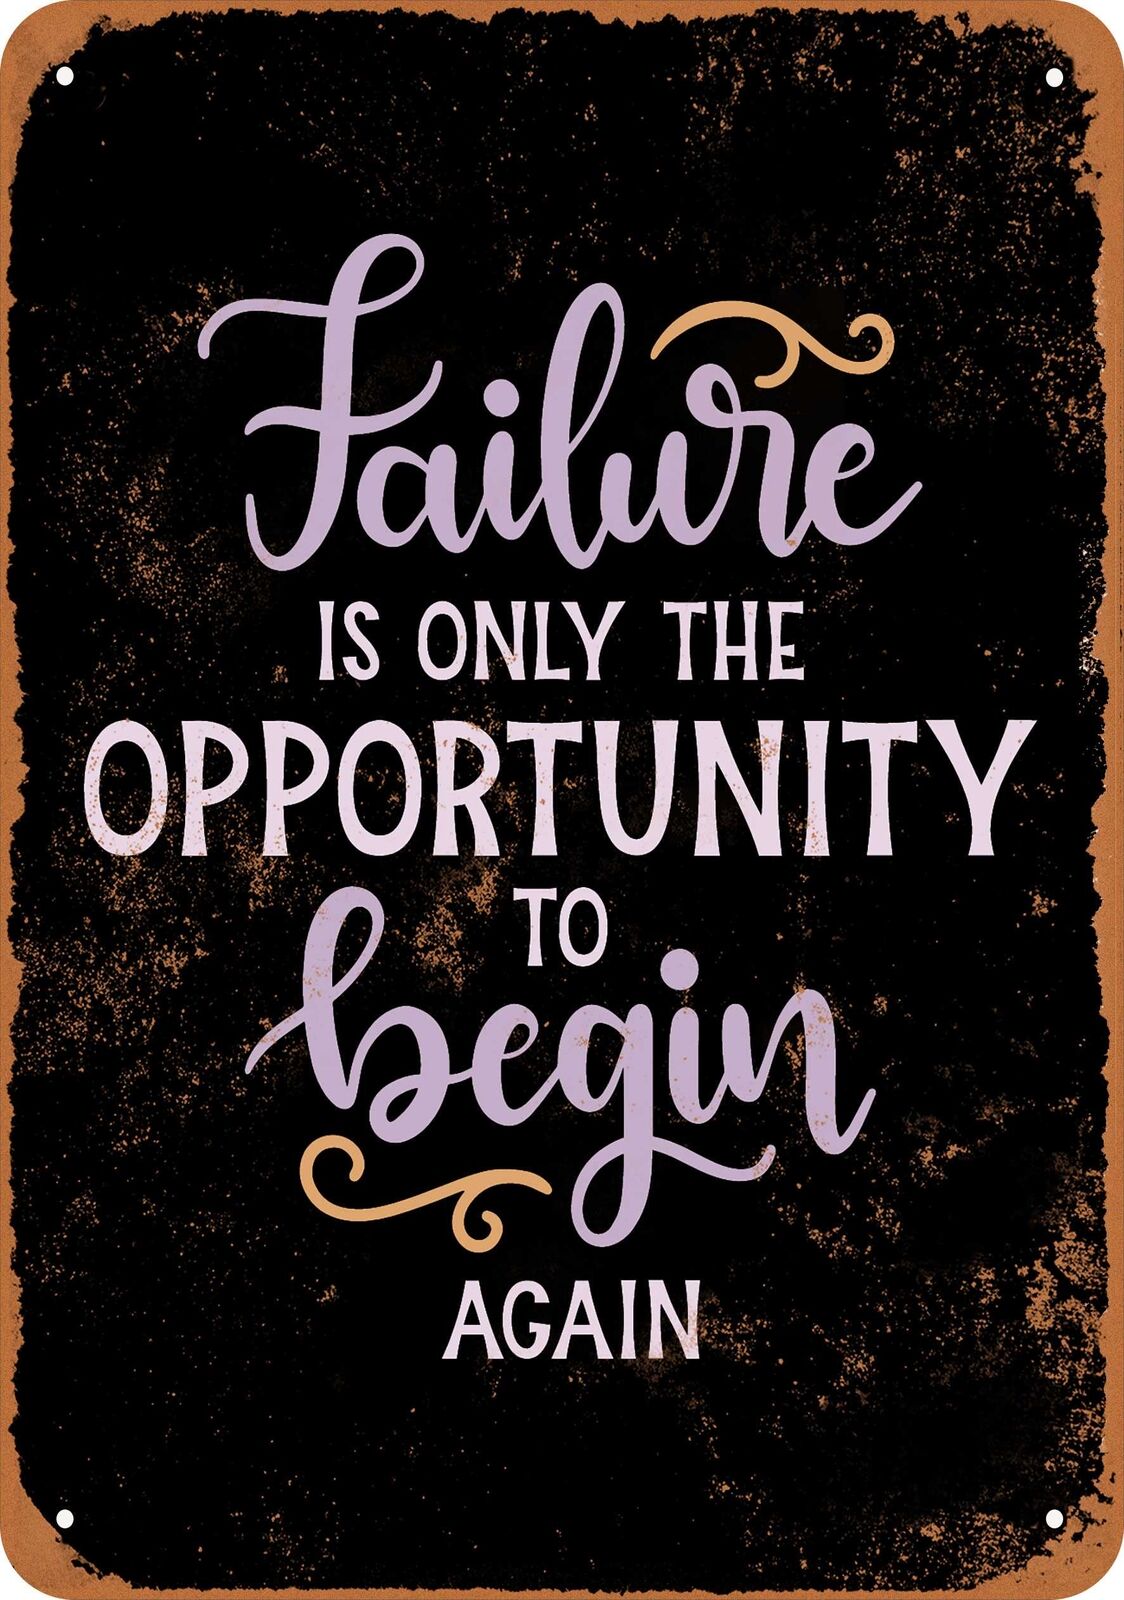 Metal Sign - Failure Is Only the Opportunity To Begin Again - Vintage Look